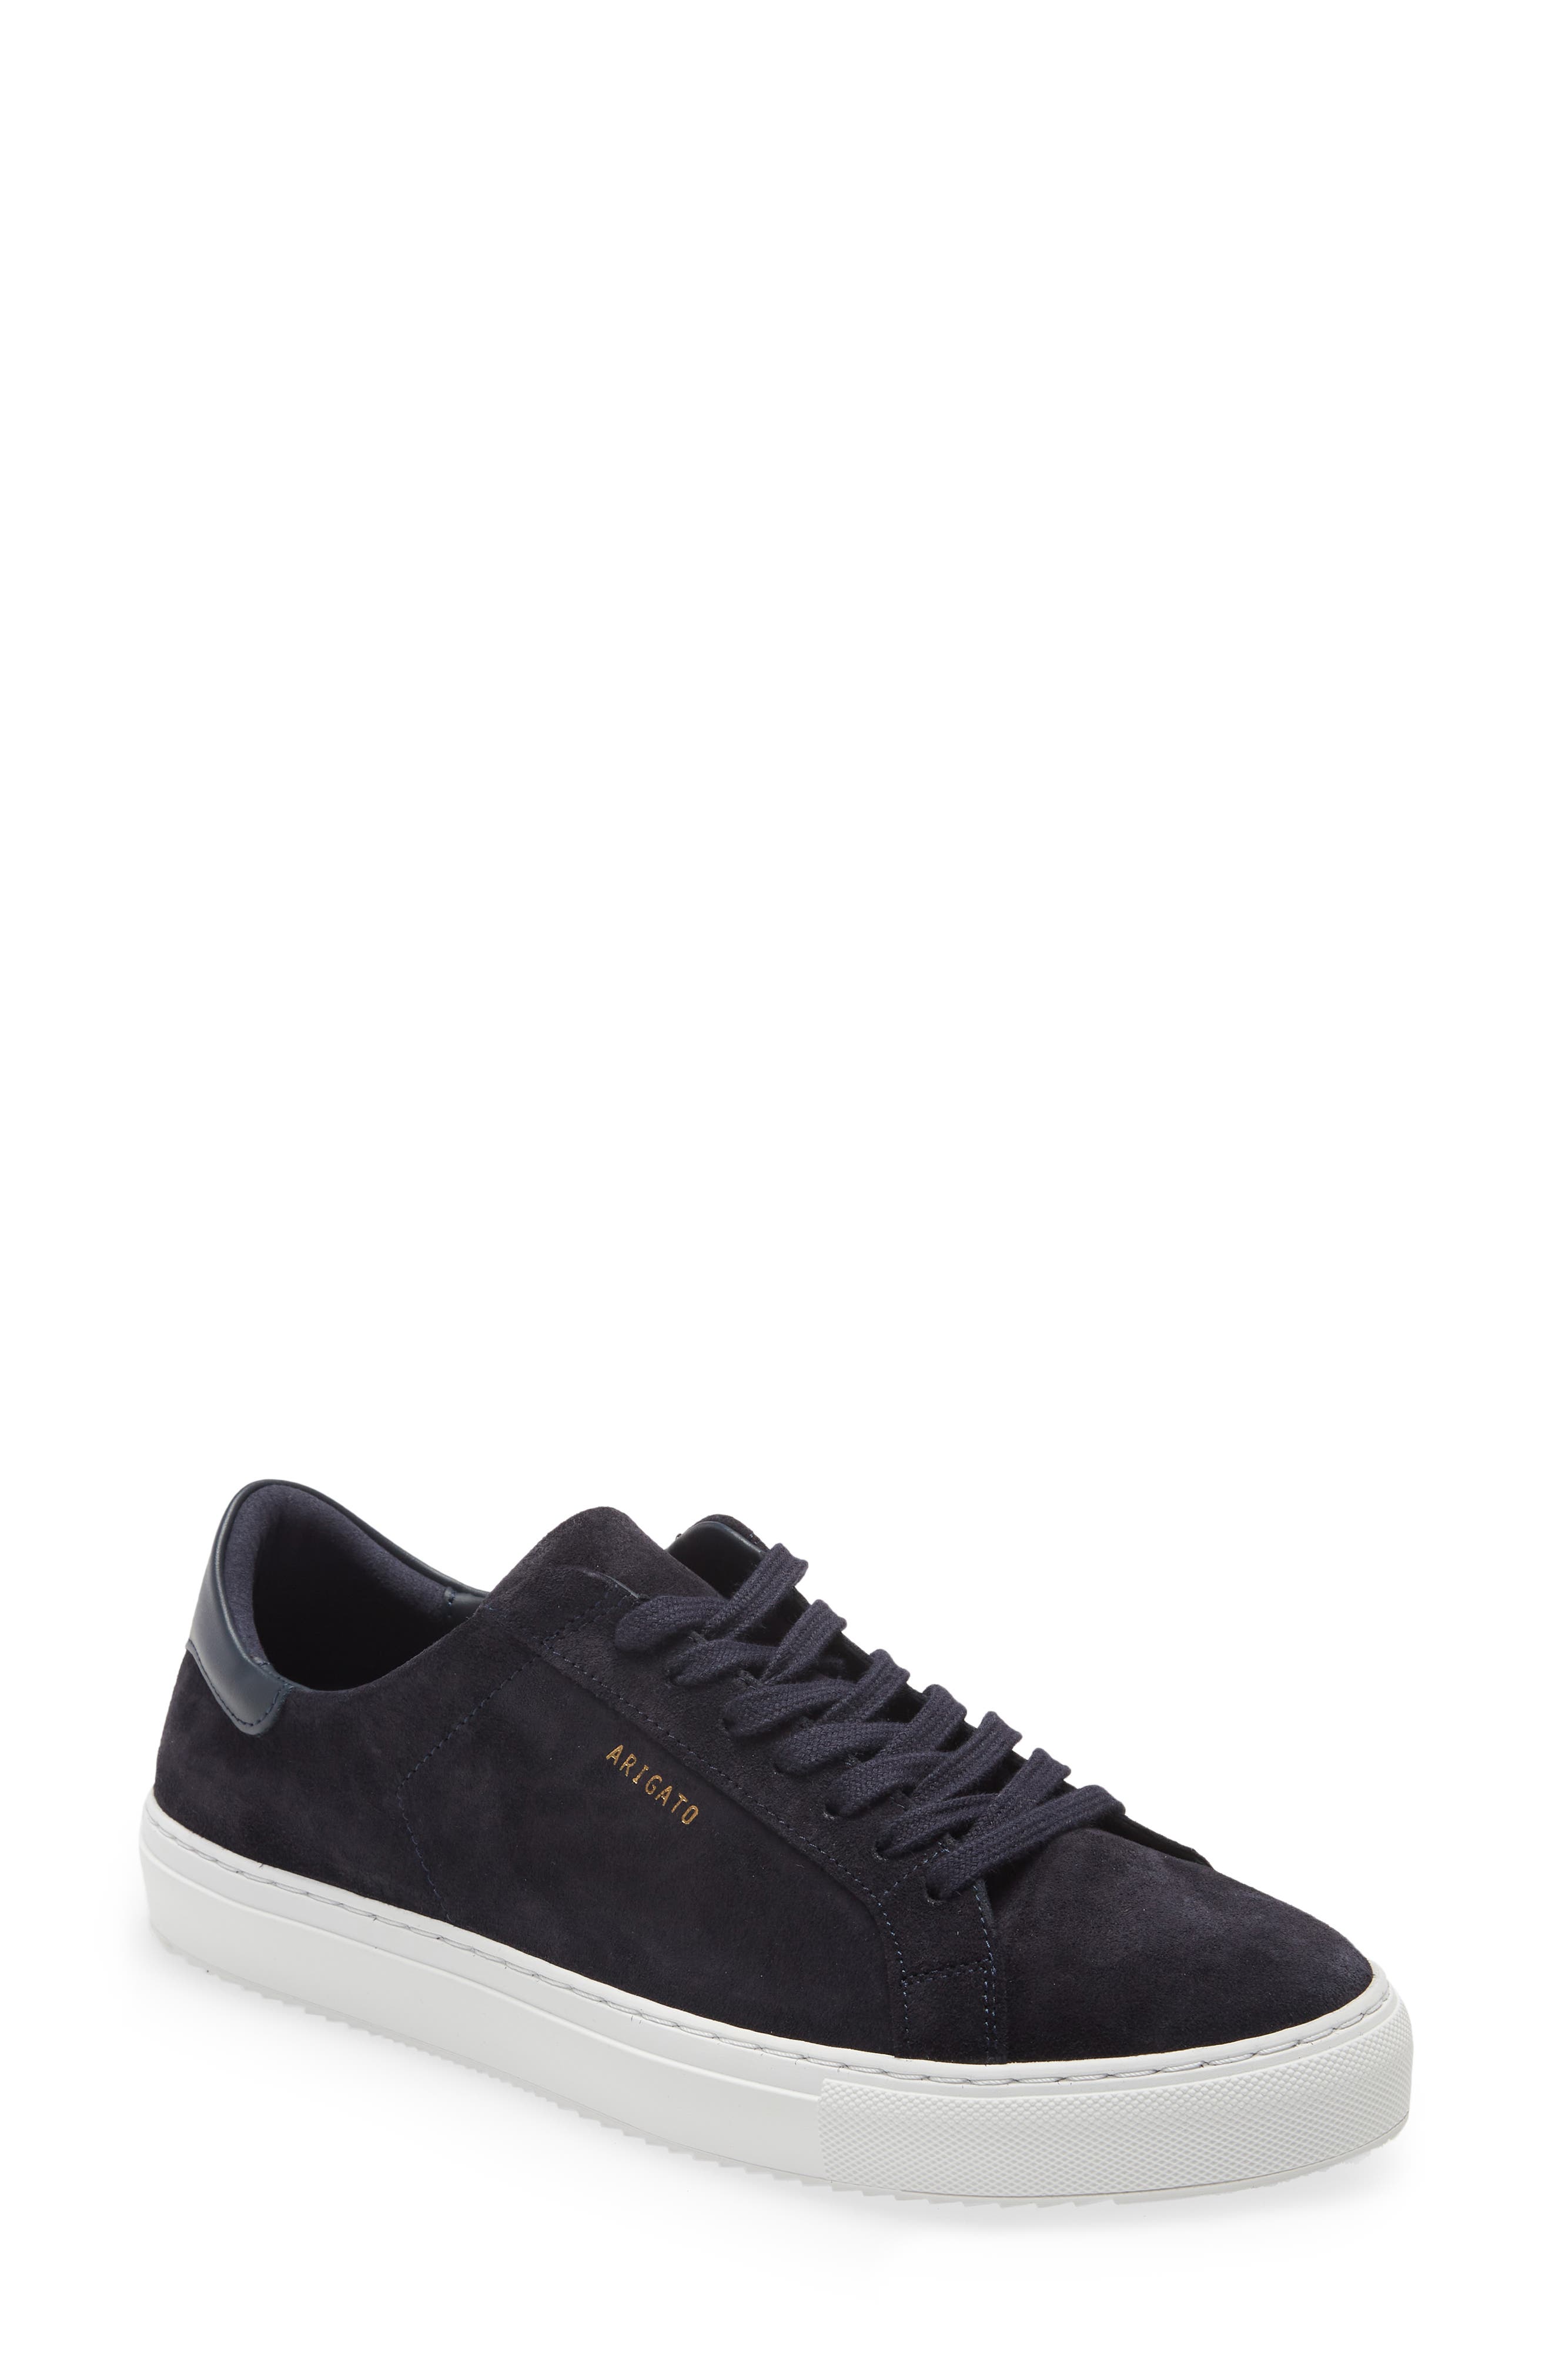 Axel Arigato Clean 90 Sneaker in Navy Suede at Nordstrom, Size 10Us